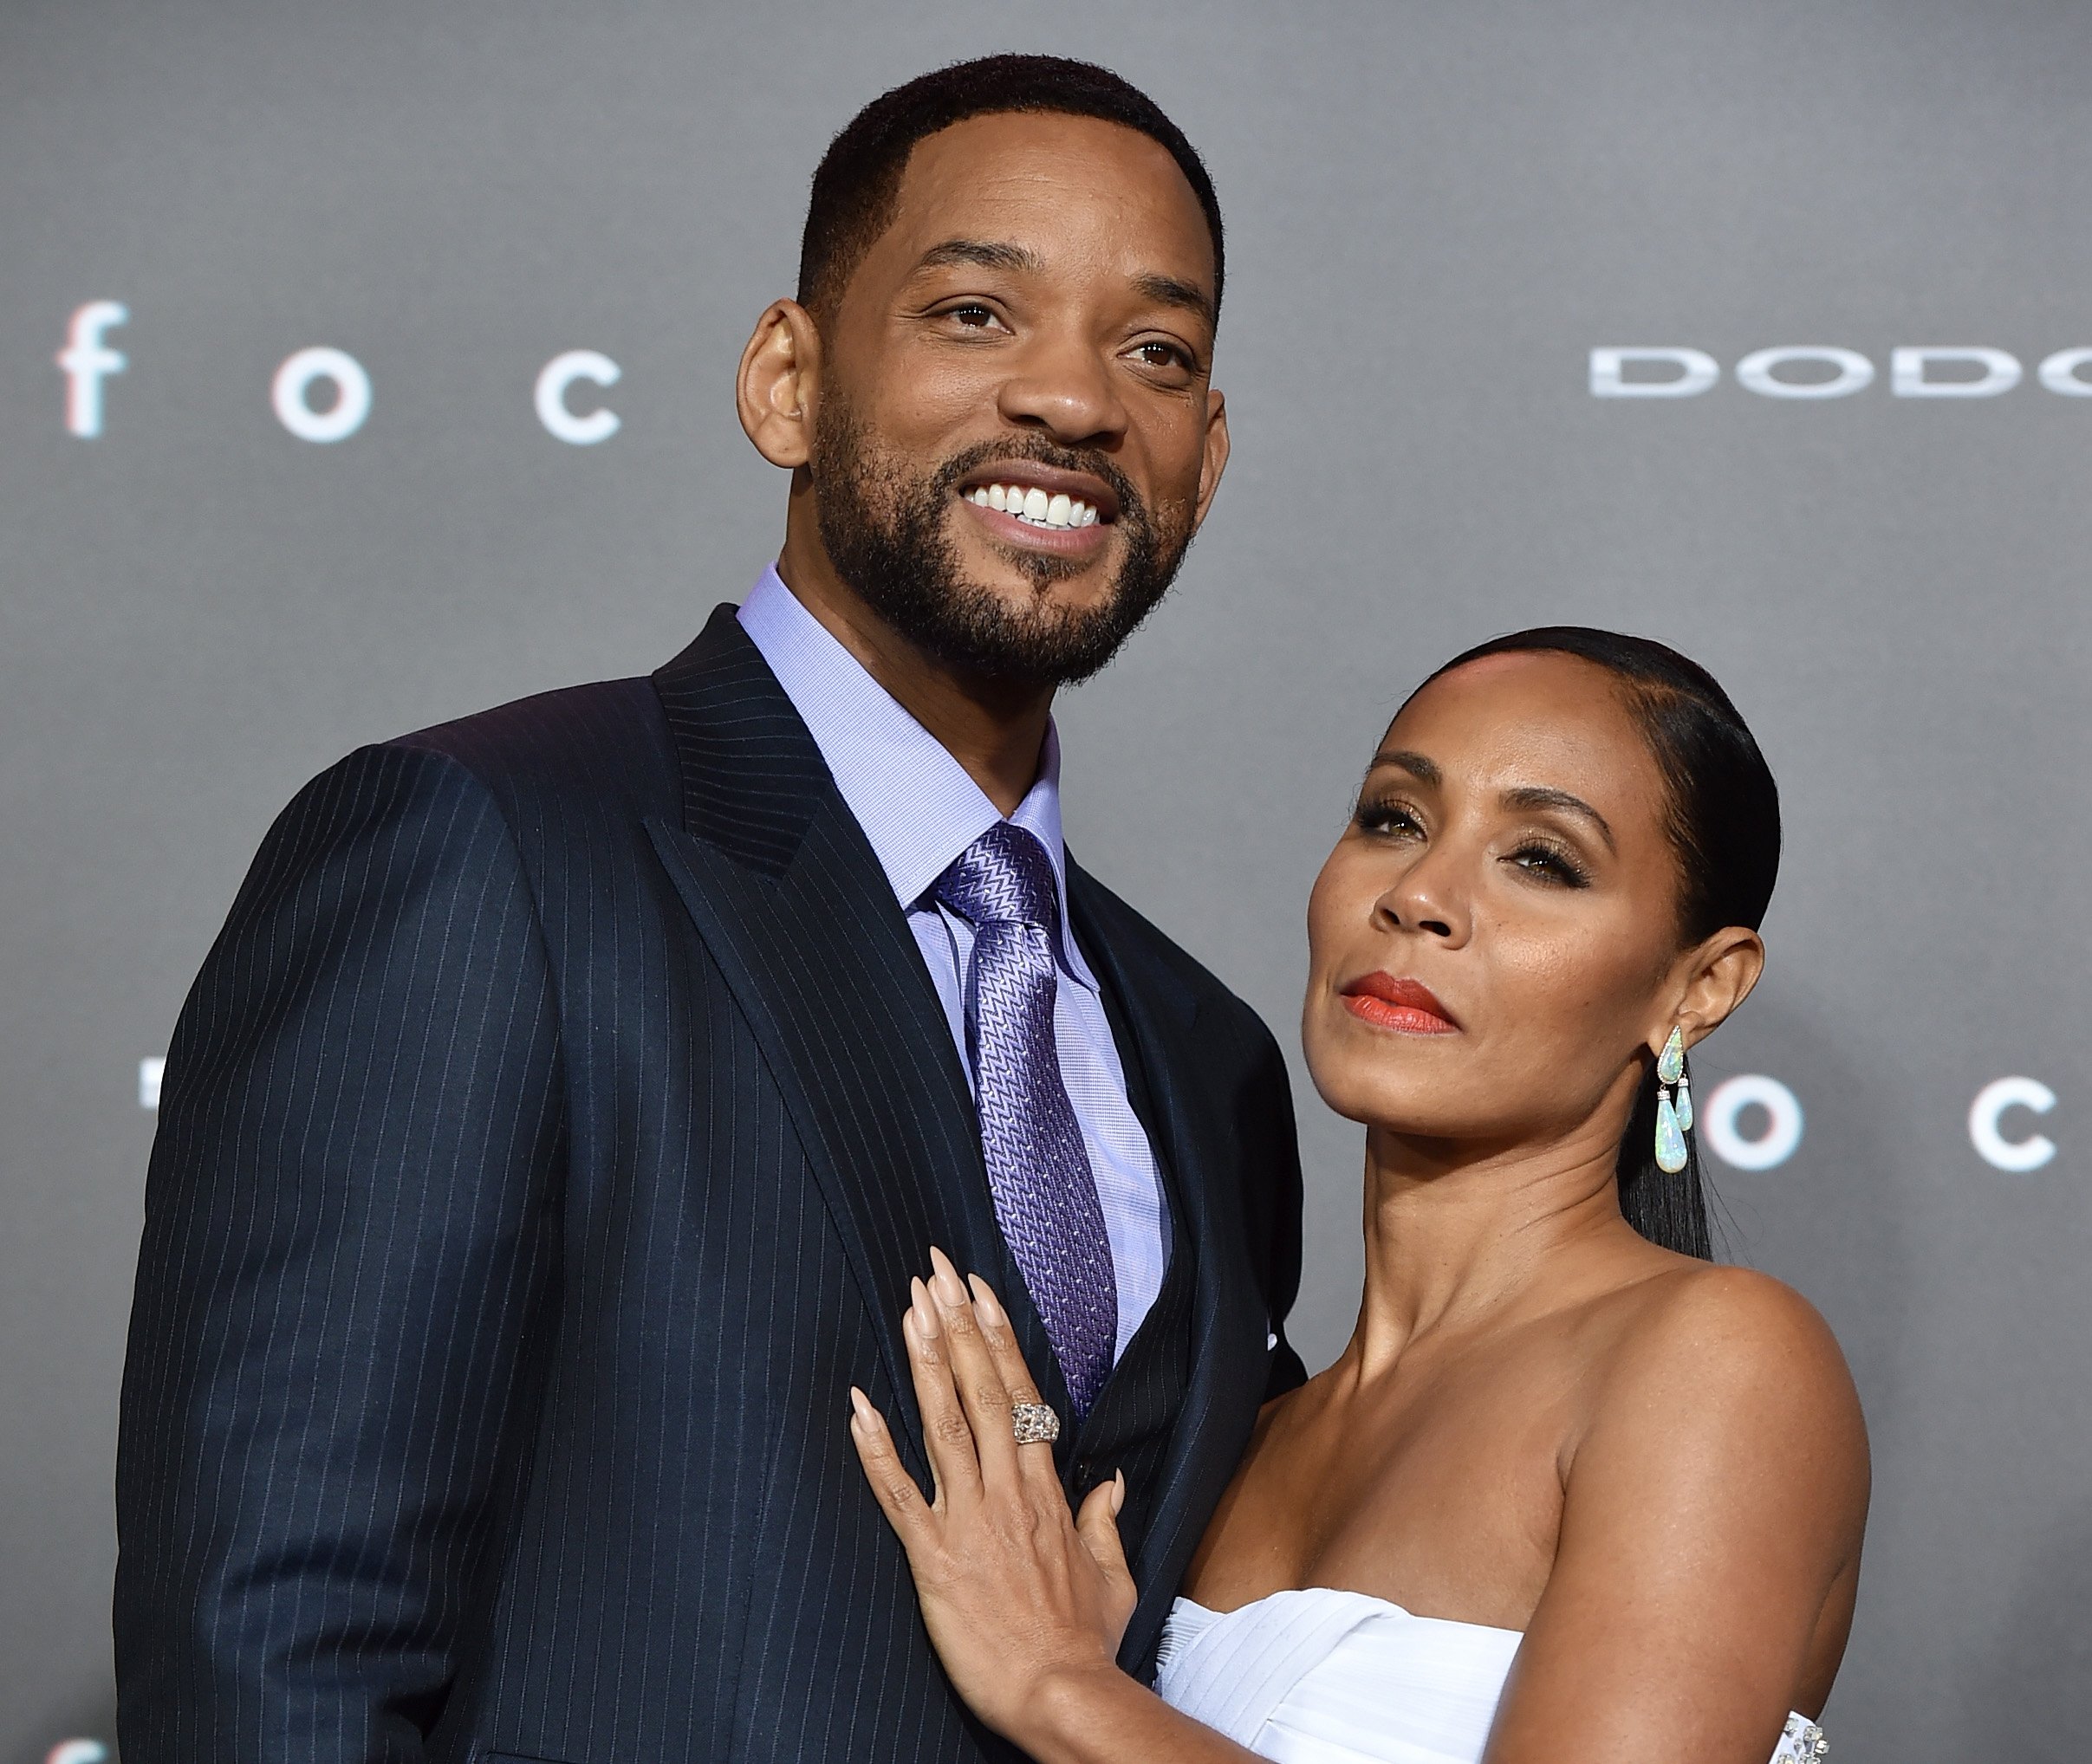 Will Smith and Jada Pinkett Smith posing at a movie premiere in 2015.